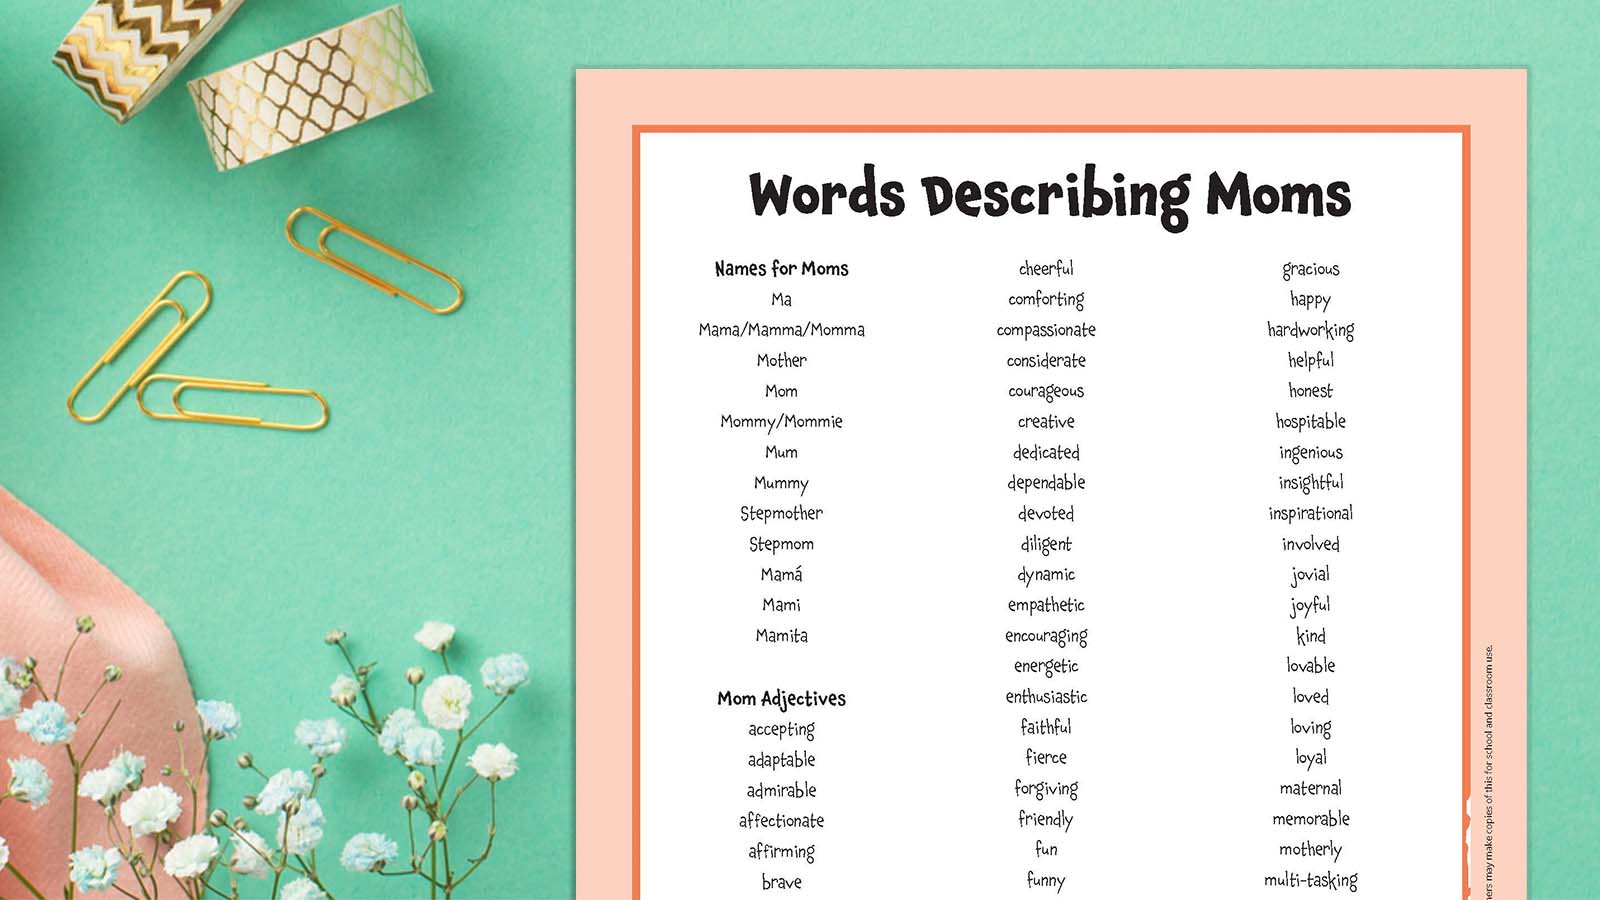 Printable of words describing moms on a green background with flowers.